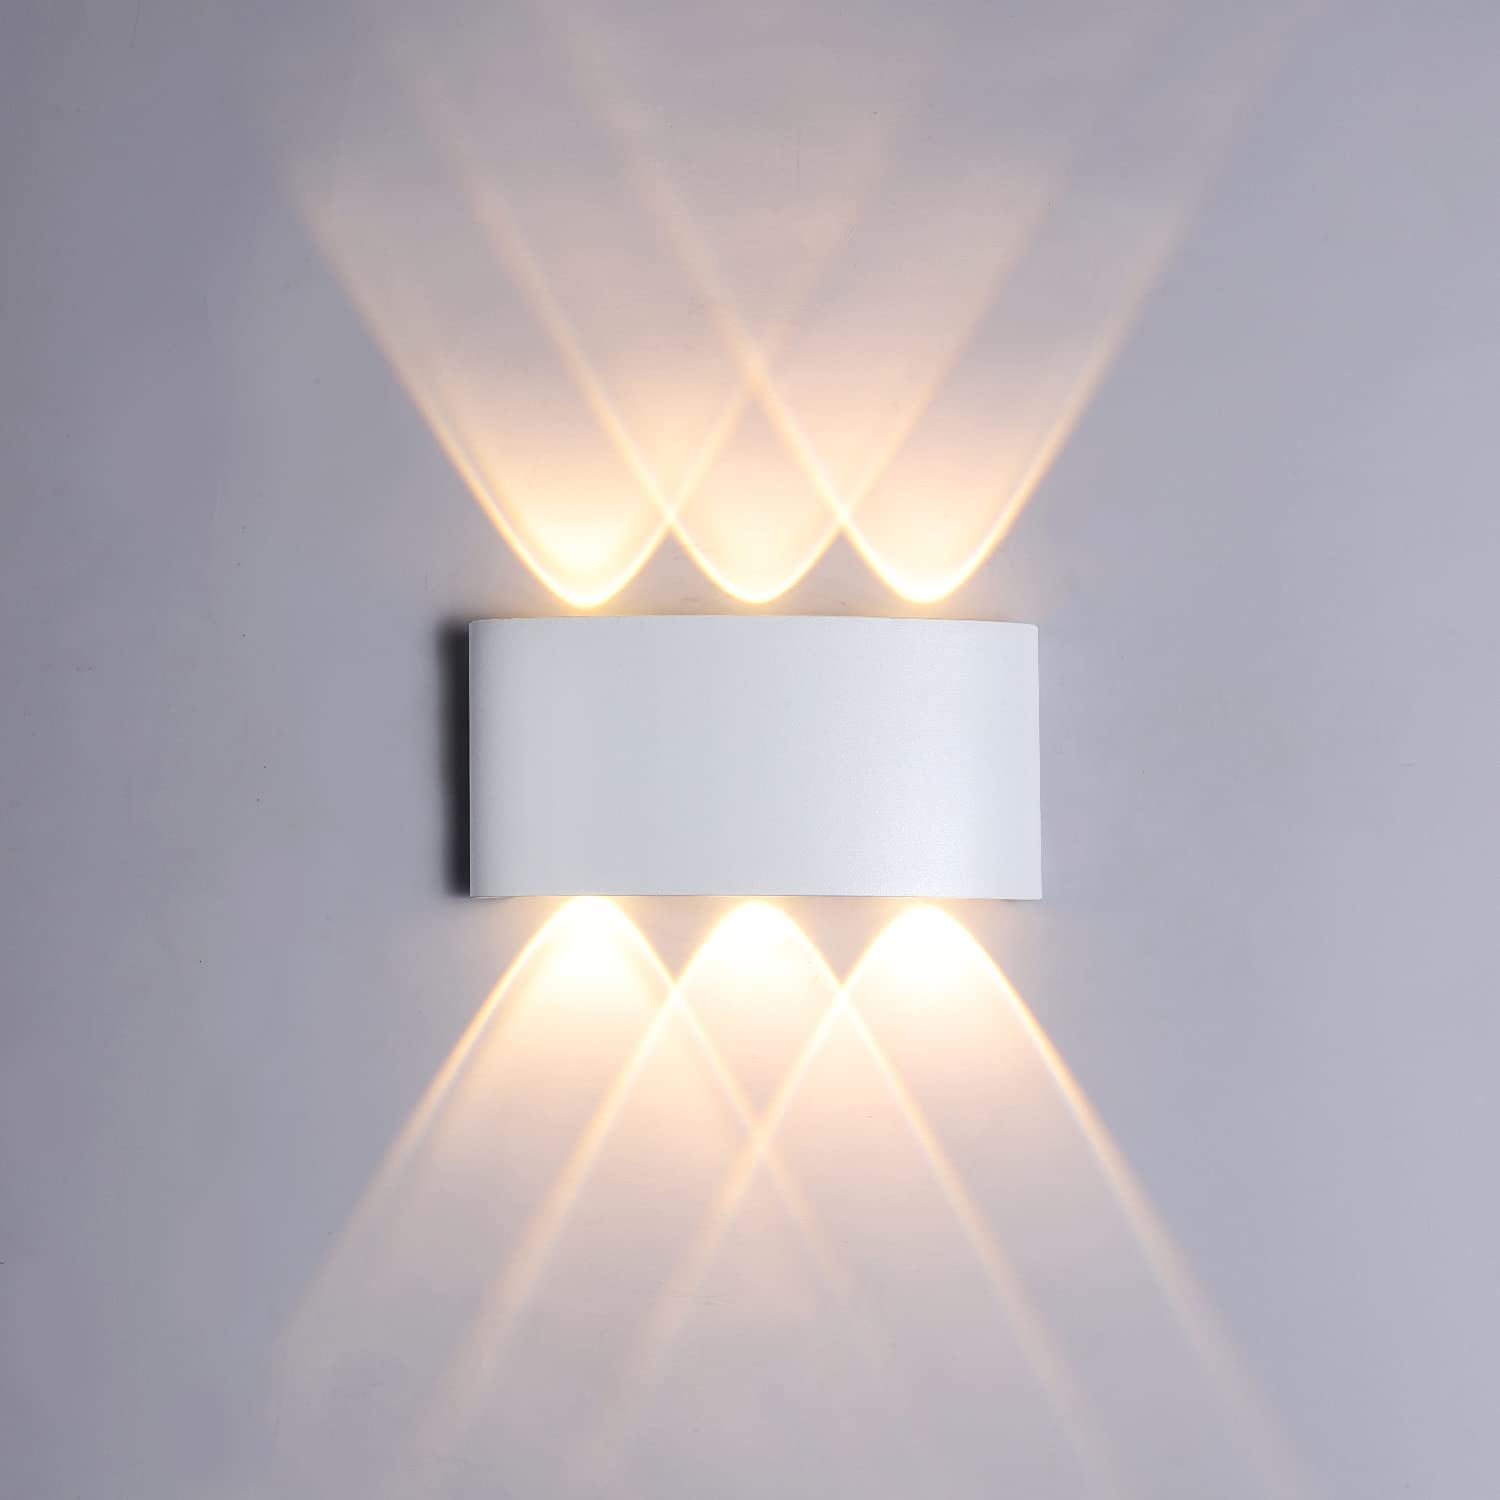 Modern Triangle 3W LED Wall Fixture Light Dimmable Lamp Decor Home Path C5A2 